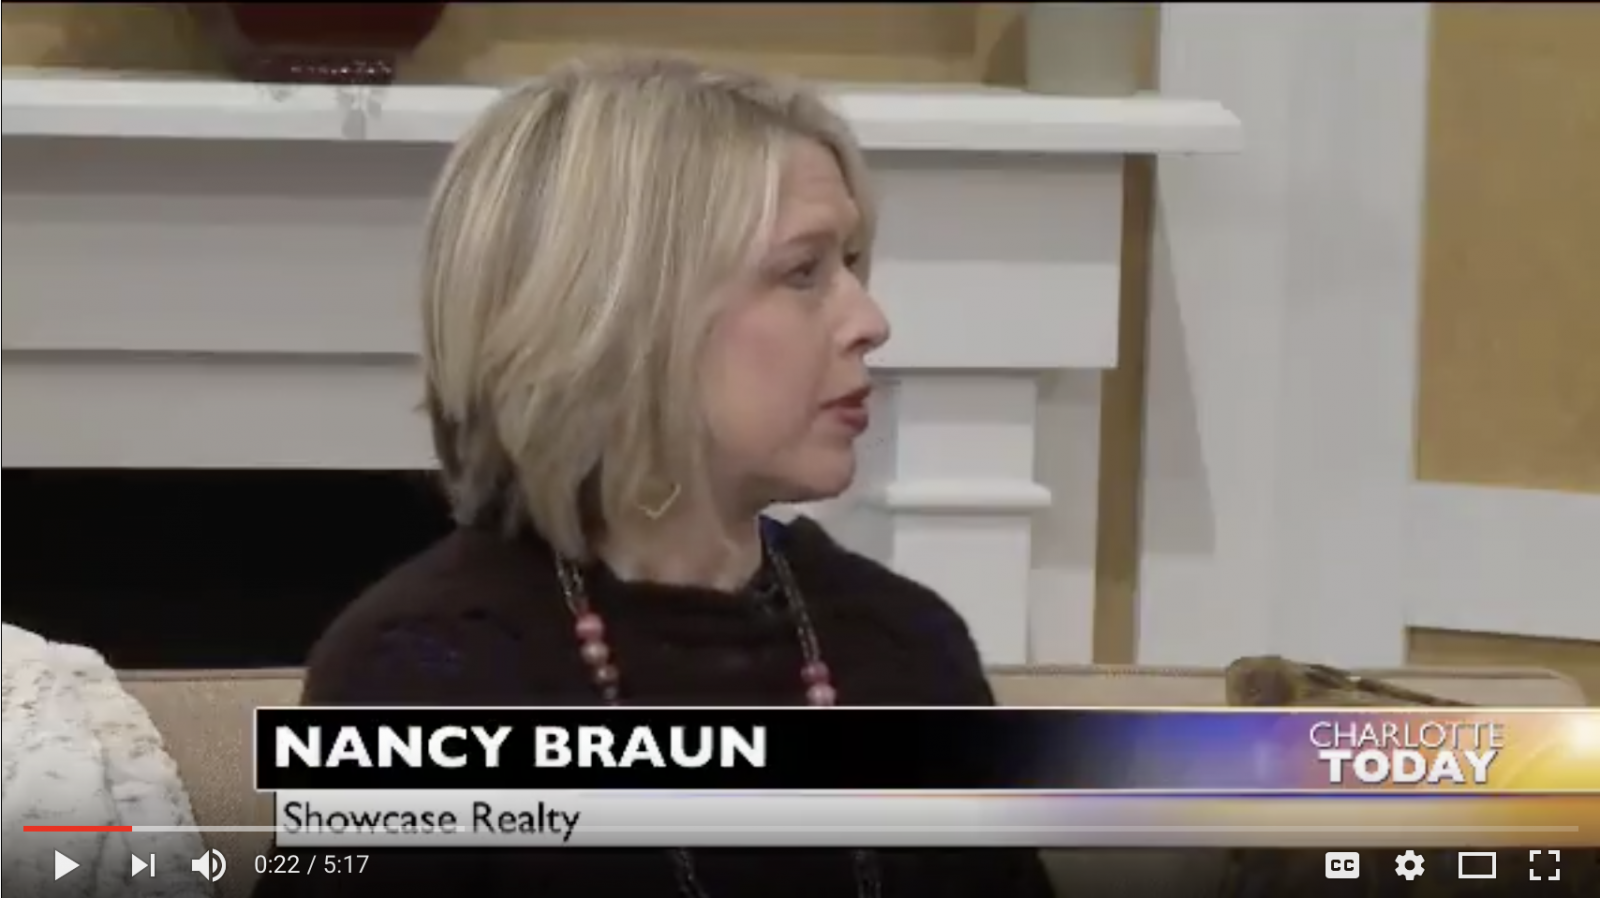 Nancy Braun on Charlotte Today talking about Choosing the right real estate agent